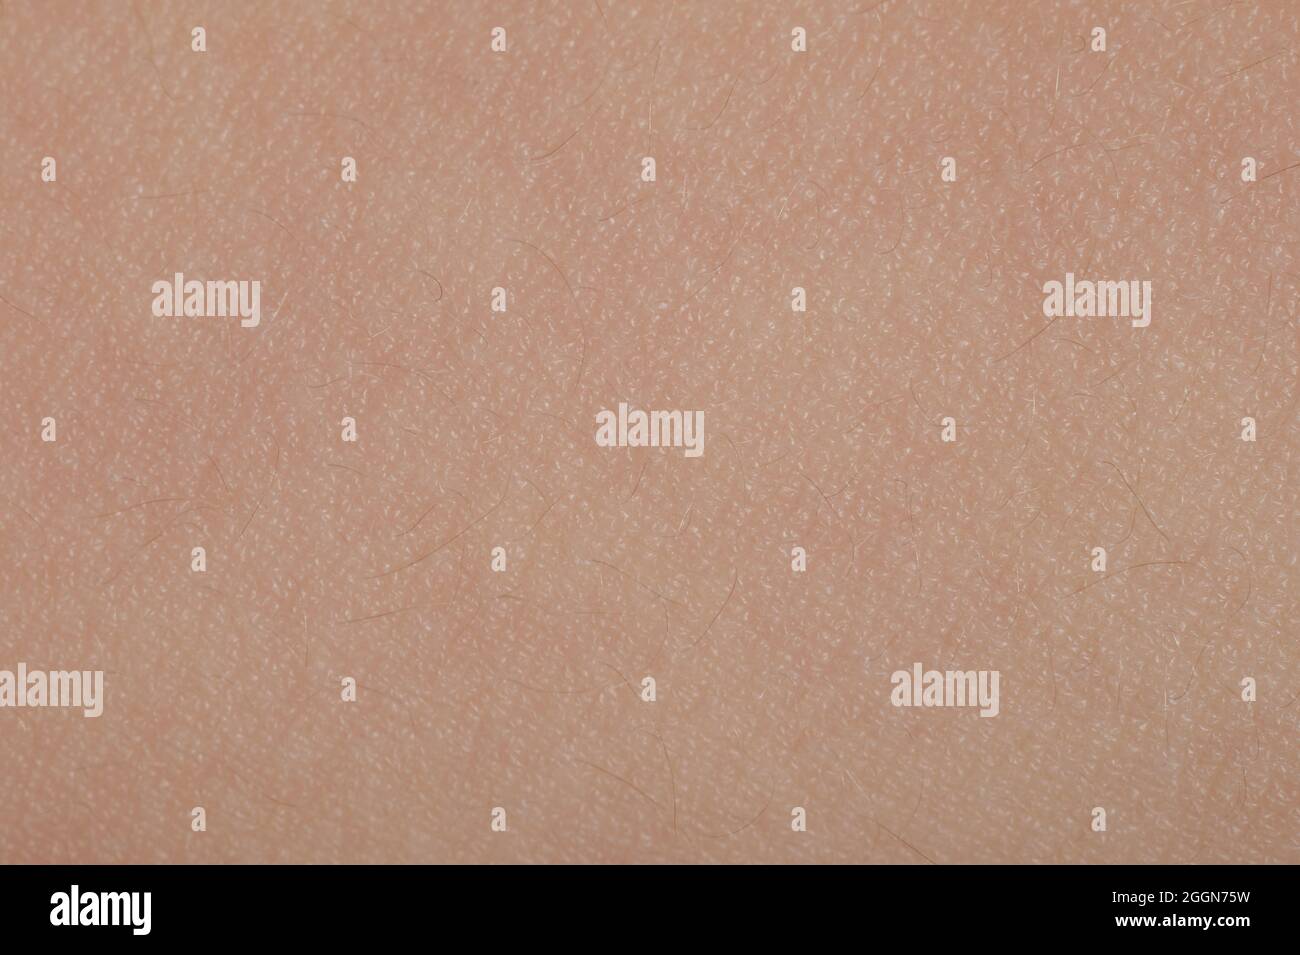 Beige color human skin pattern macro close up view Stock Photo